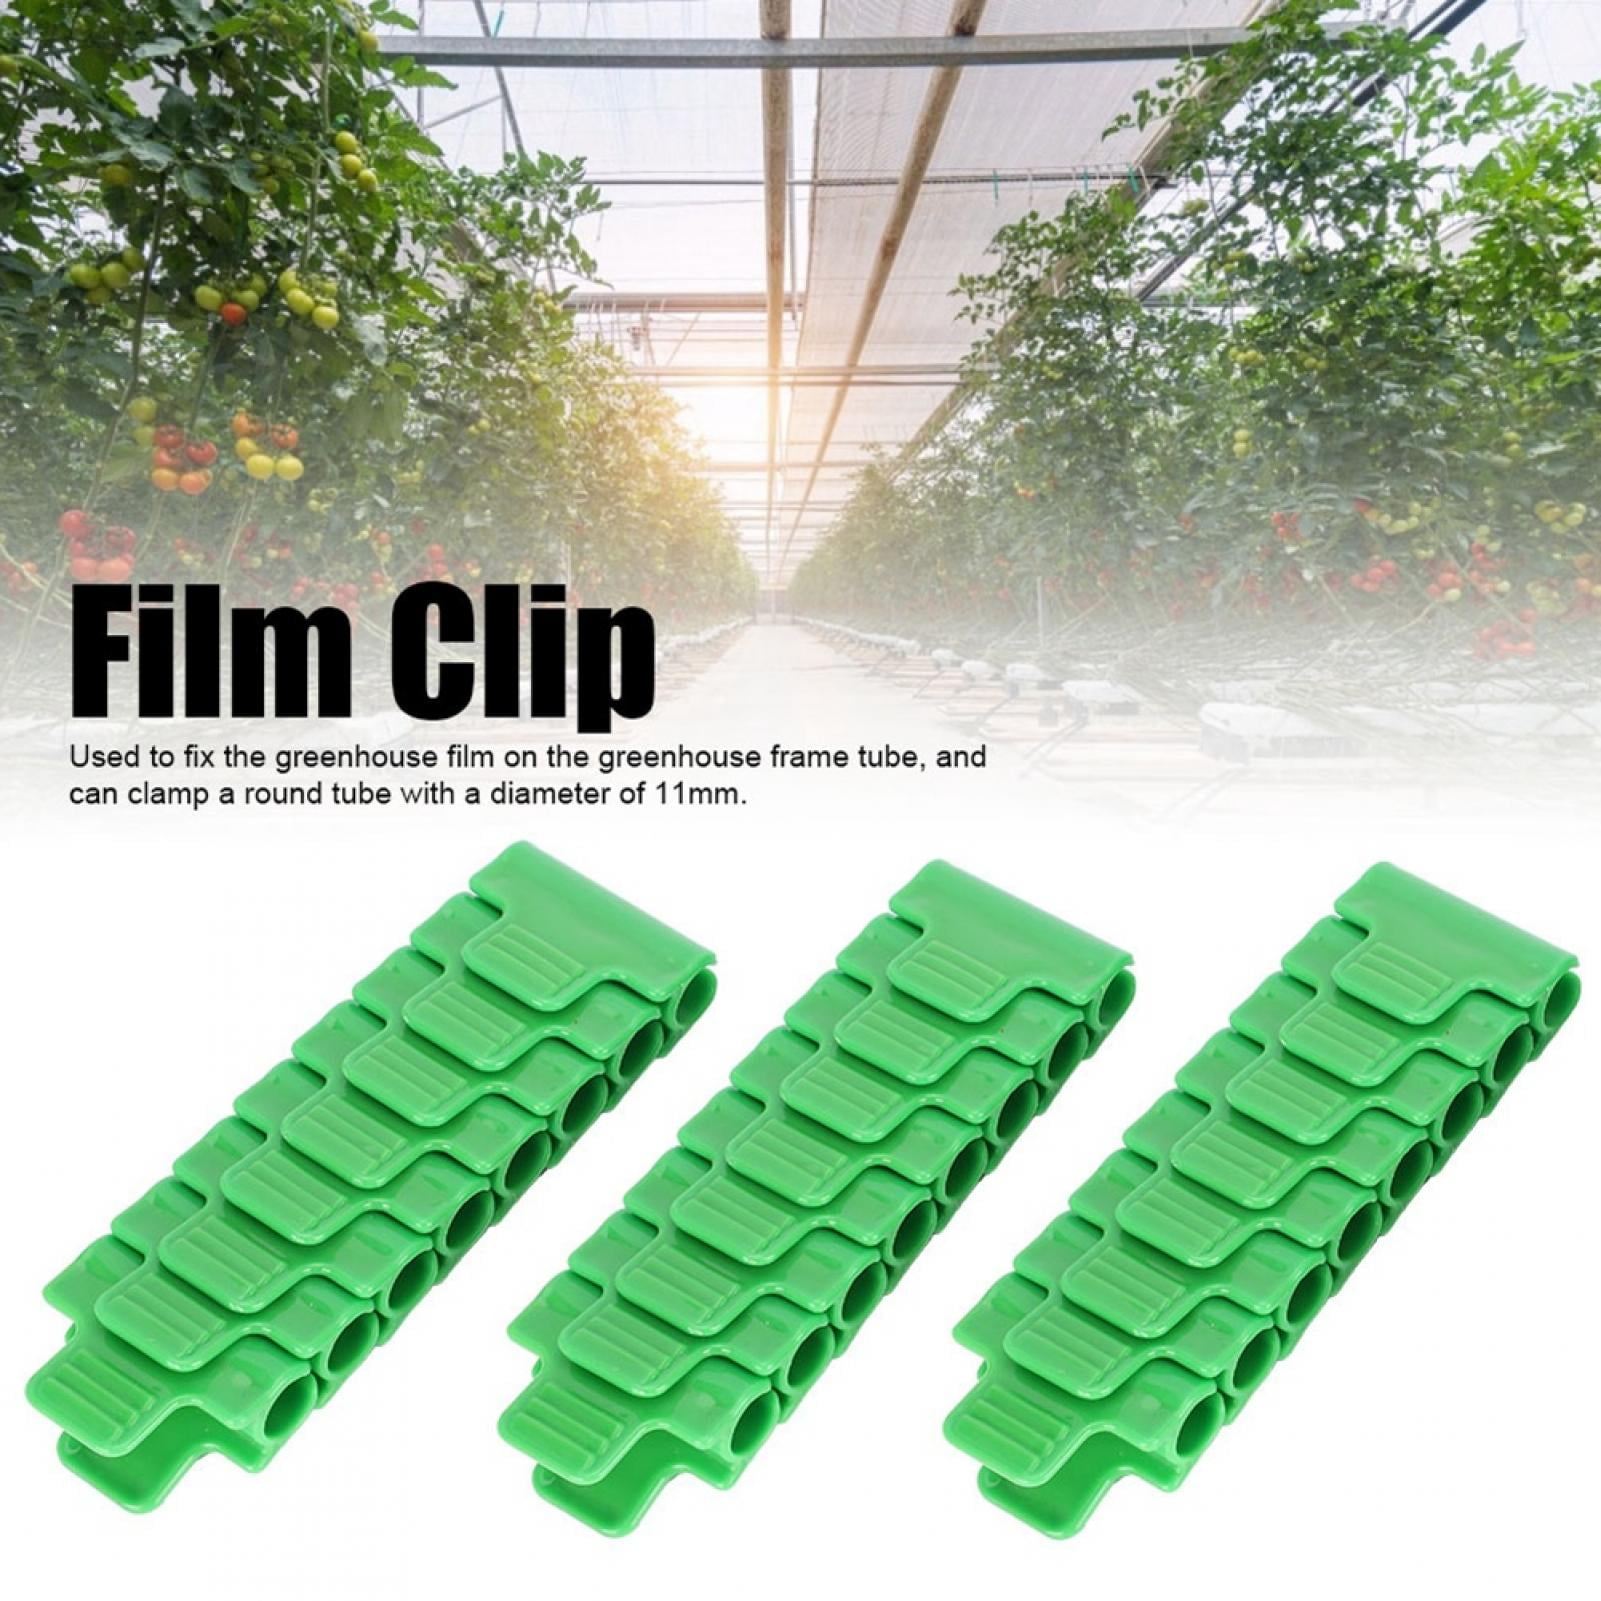 Greenhouse Film Clip 24Pcs No Slippage Plastic Greenhouse Film Clip Clamp Gardening Tool No Rust High Temperature Resistant Clamps for Greenhouse Film Row Cover Plastic Film Insect Net and Shade Net 